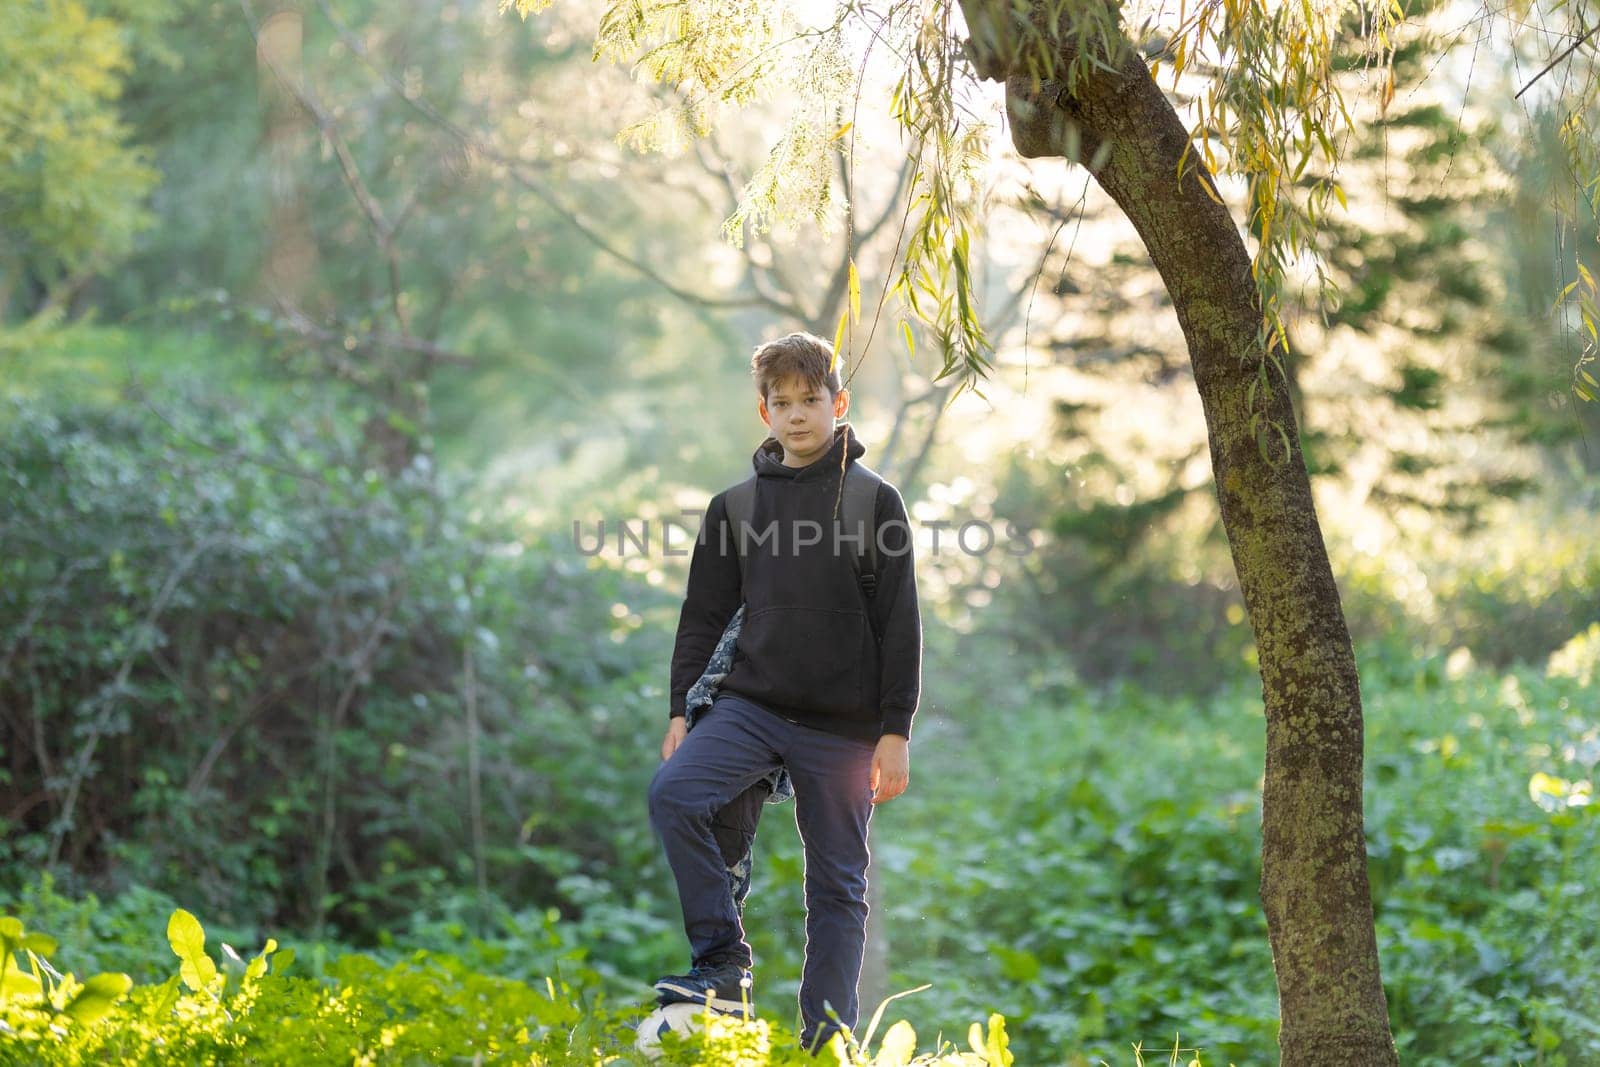 A boy is standing in a forest with a backpack on. The boy is wearing a black hoodie and blue pants